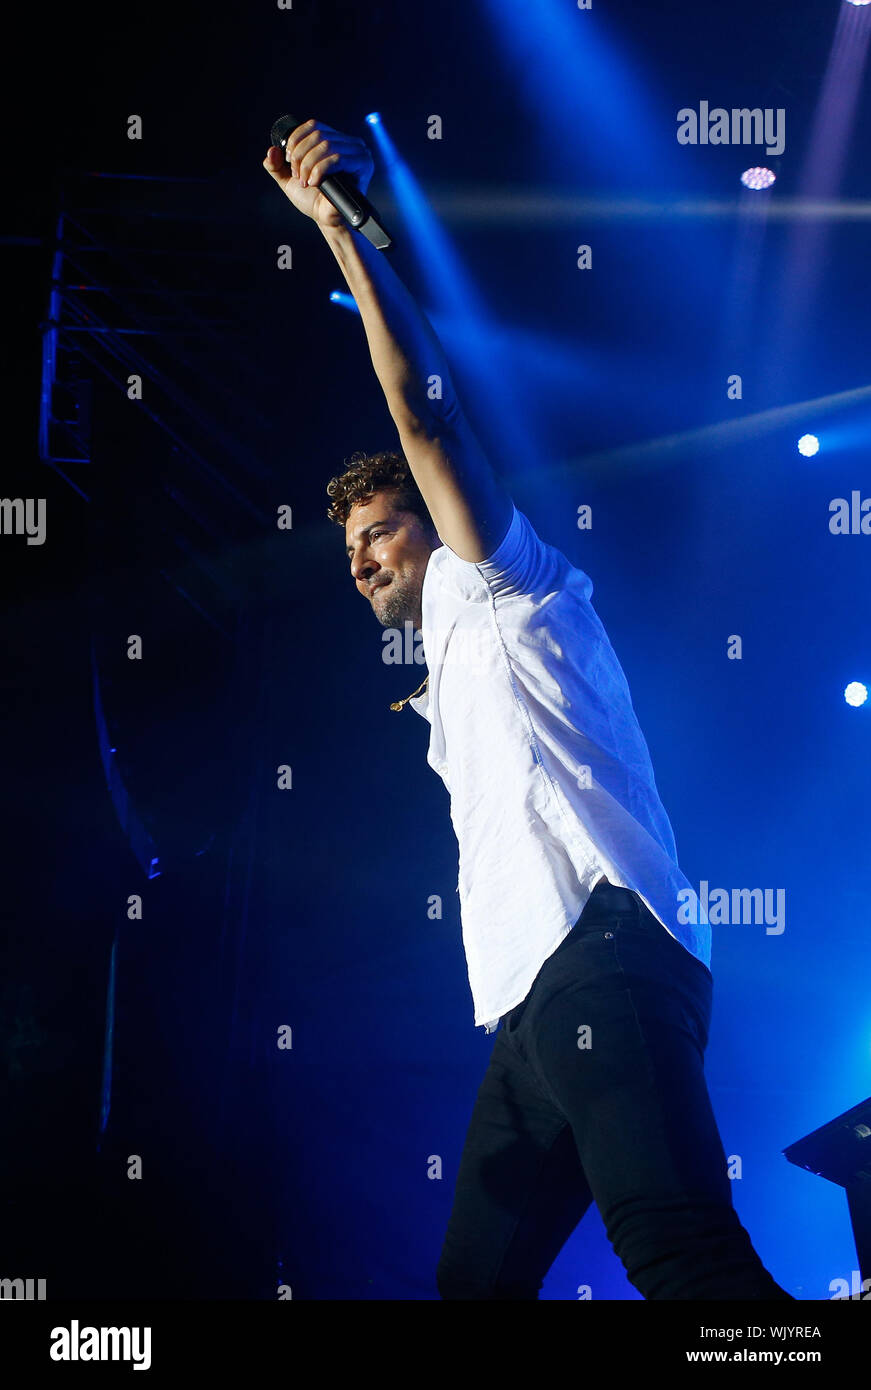 Calvia, Mallorca / Spain- August 31, 2019: Spanish singer David Bisbal performs live during his 2019 promotion tour near the village of Calvia in the Stock Photo